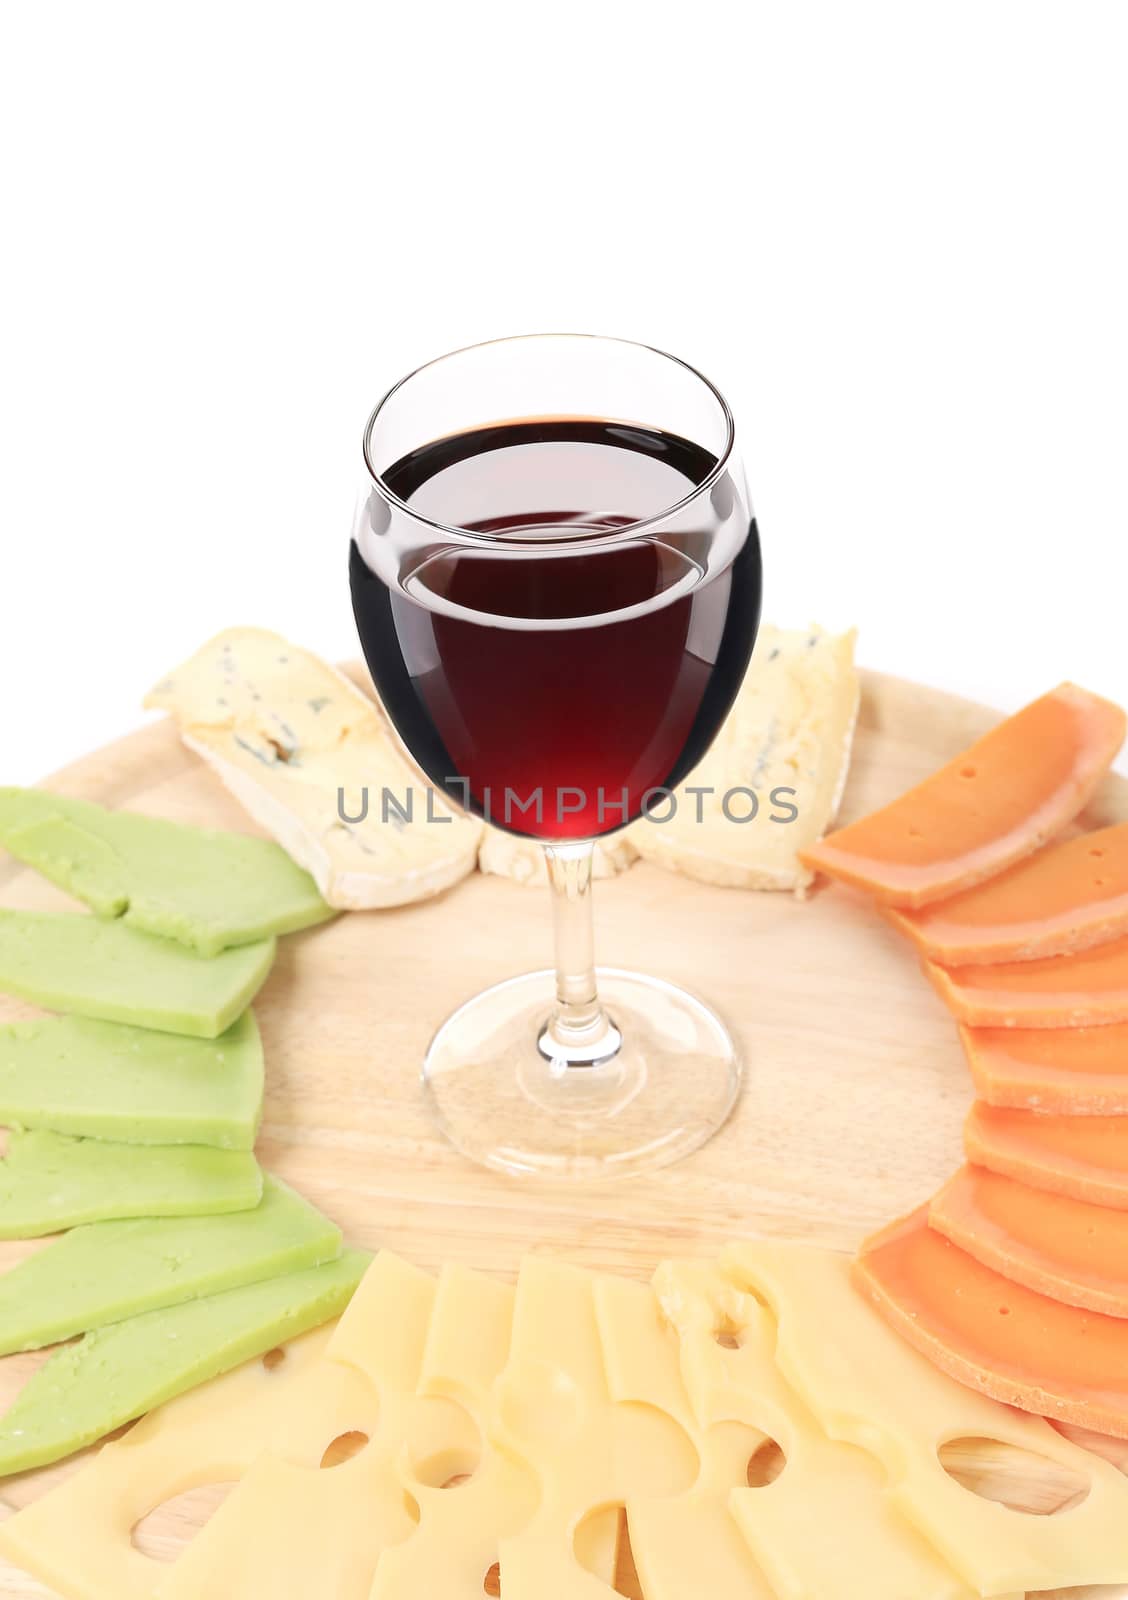 Cheese plate and glass of wine. Isolated on a white background.